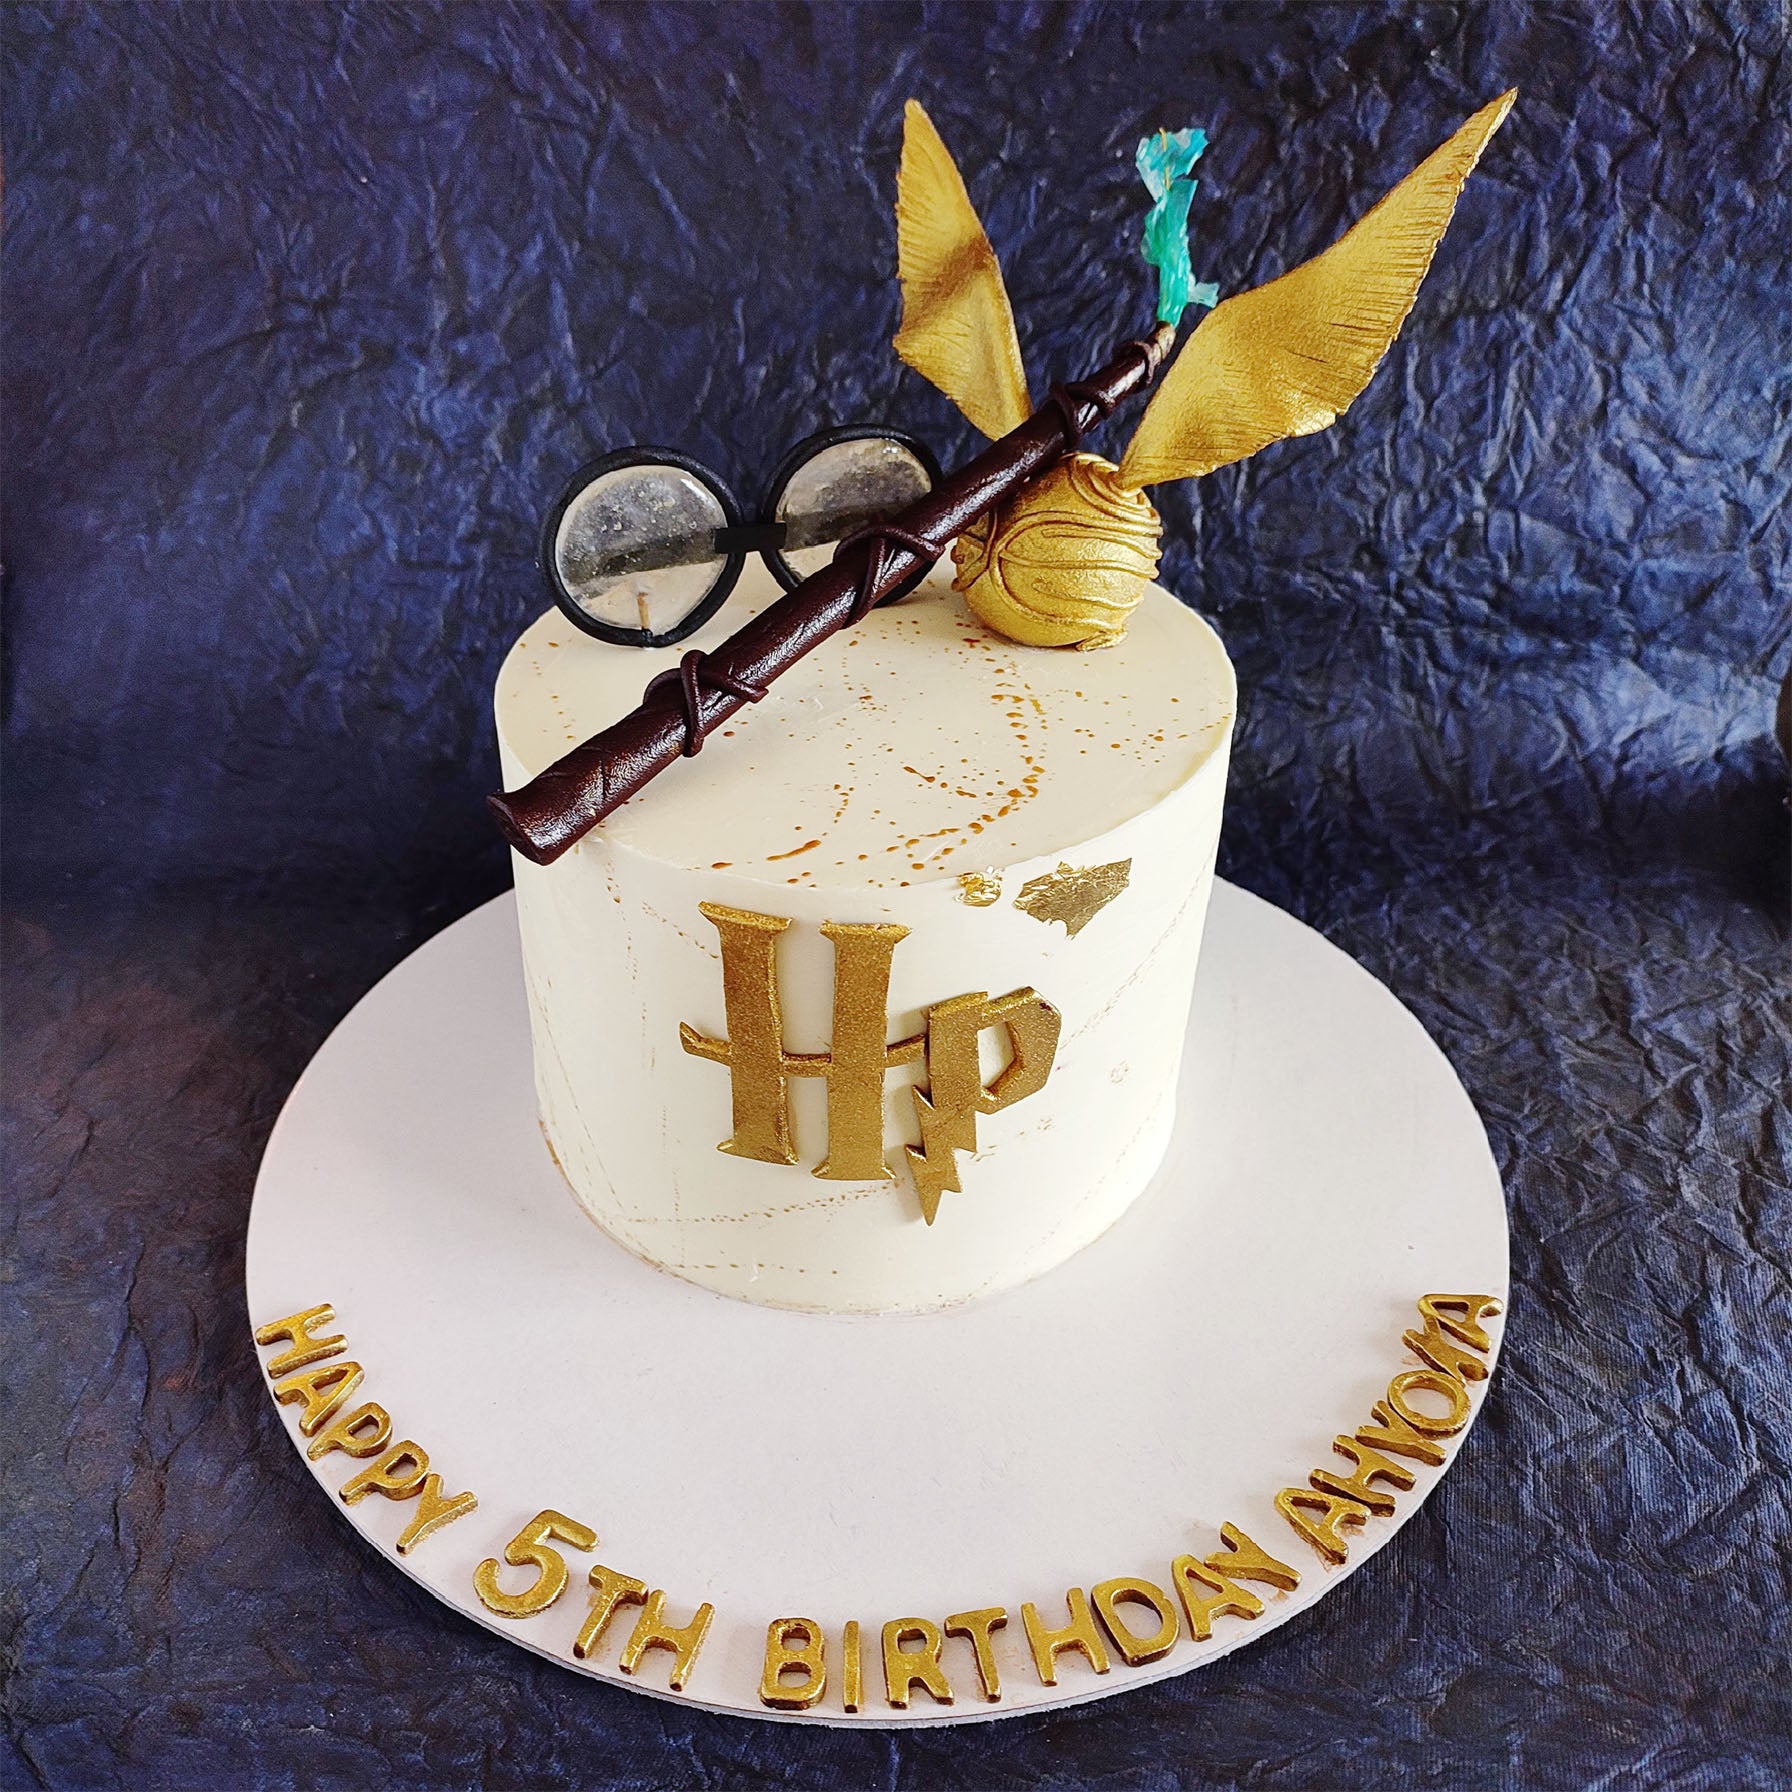 Lily Cakes - Harry Potter themed birthday cake! | Facebook